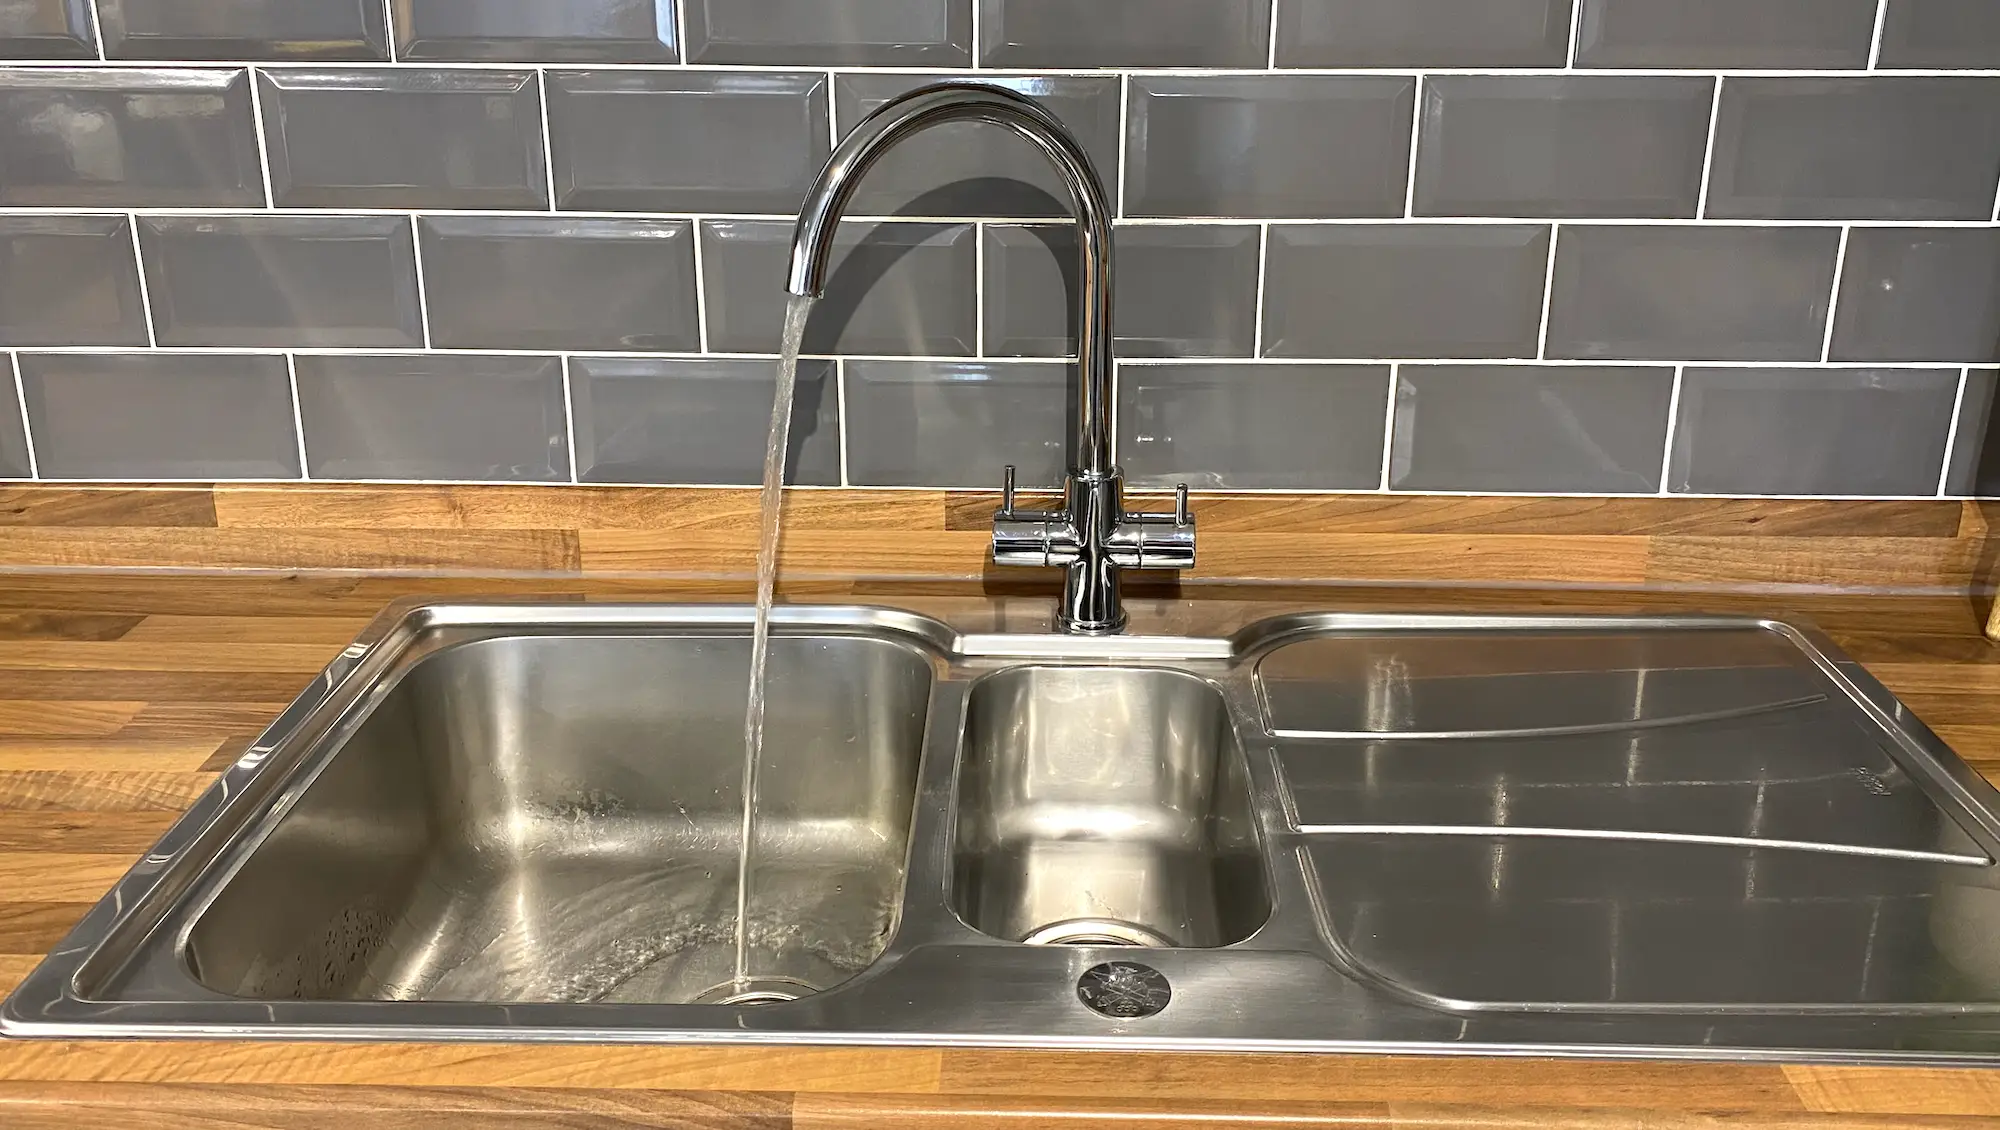 Estimates for replace a kitchen mixer tap near Medway